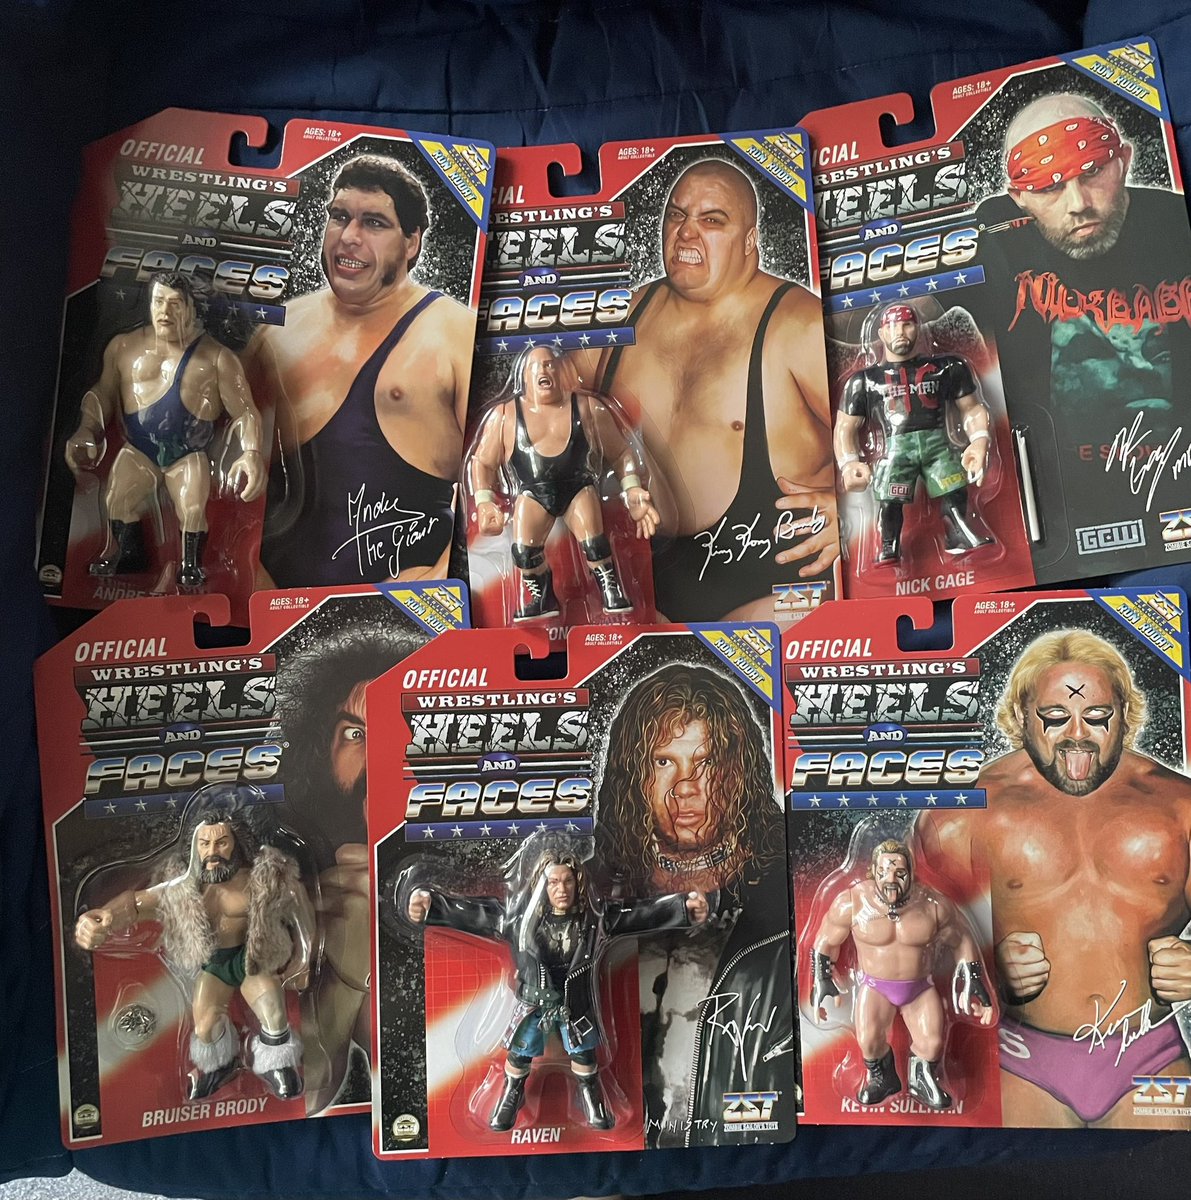 Mail call from @TheZombieSailor these are incredible figures #heelsandfaces